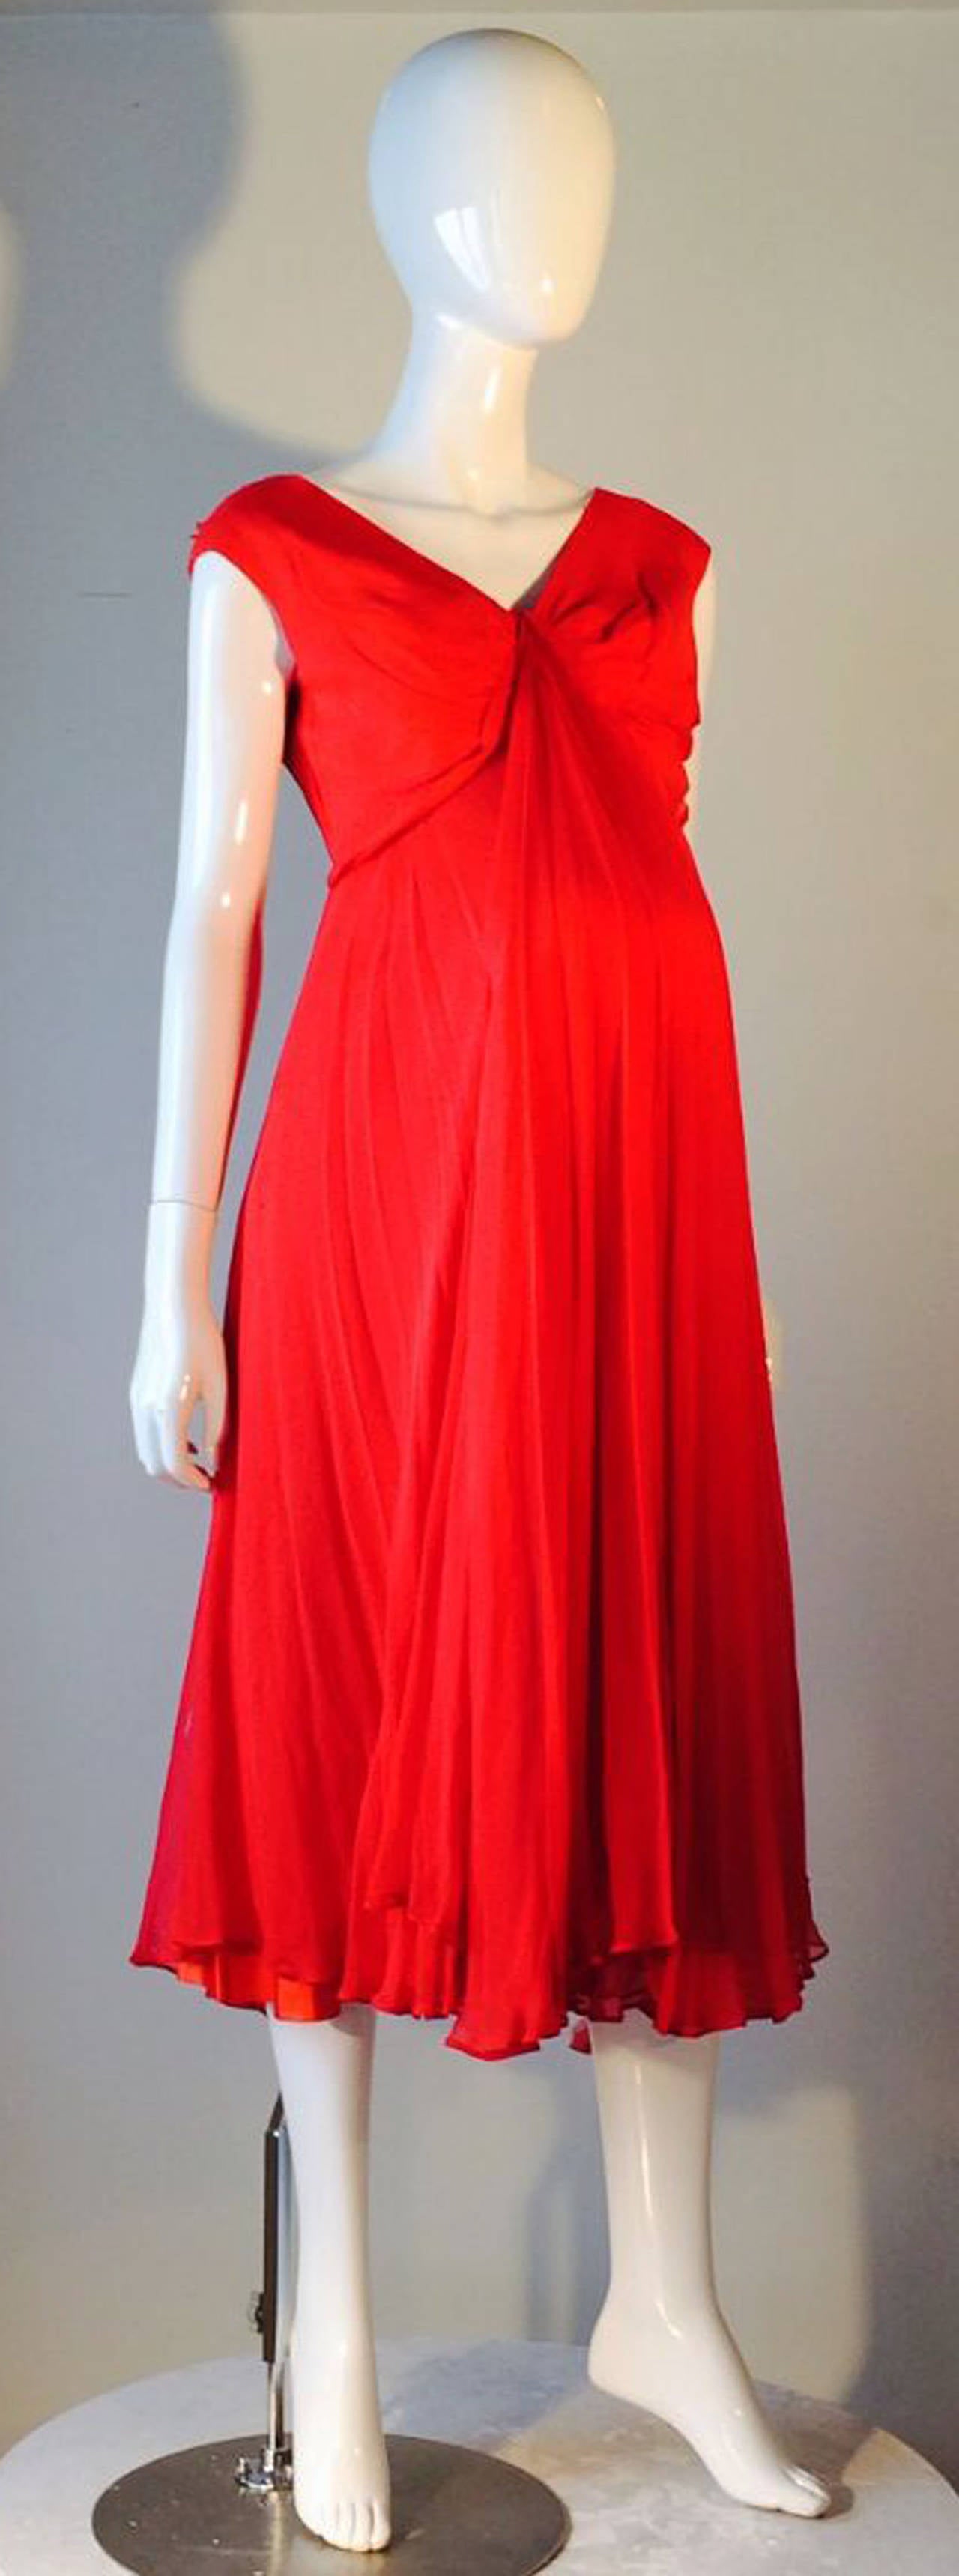 A extremely rare vintage red silk chiffon maternity cocktail dress worn by former First Lady, Jackie Kennedy. Dress worn during John F. Kennedy Jr. pregnancy, 1960. Item previously sold thru Julien's Auctions (Jan 15, 2007 lot 736). Dress mentioned